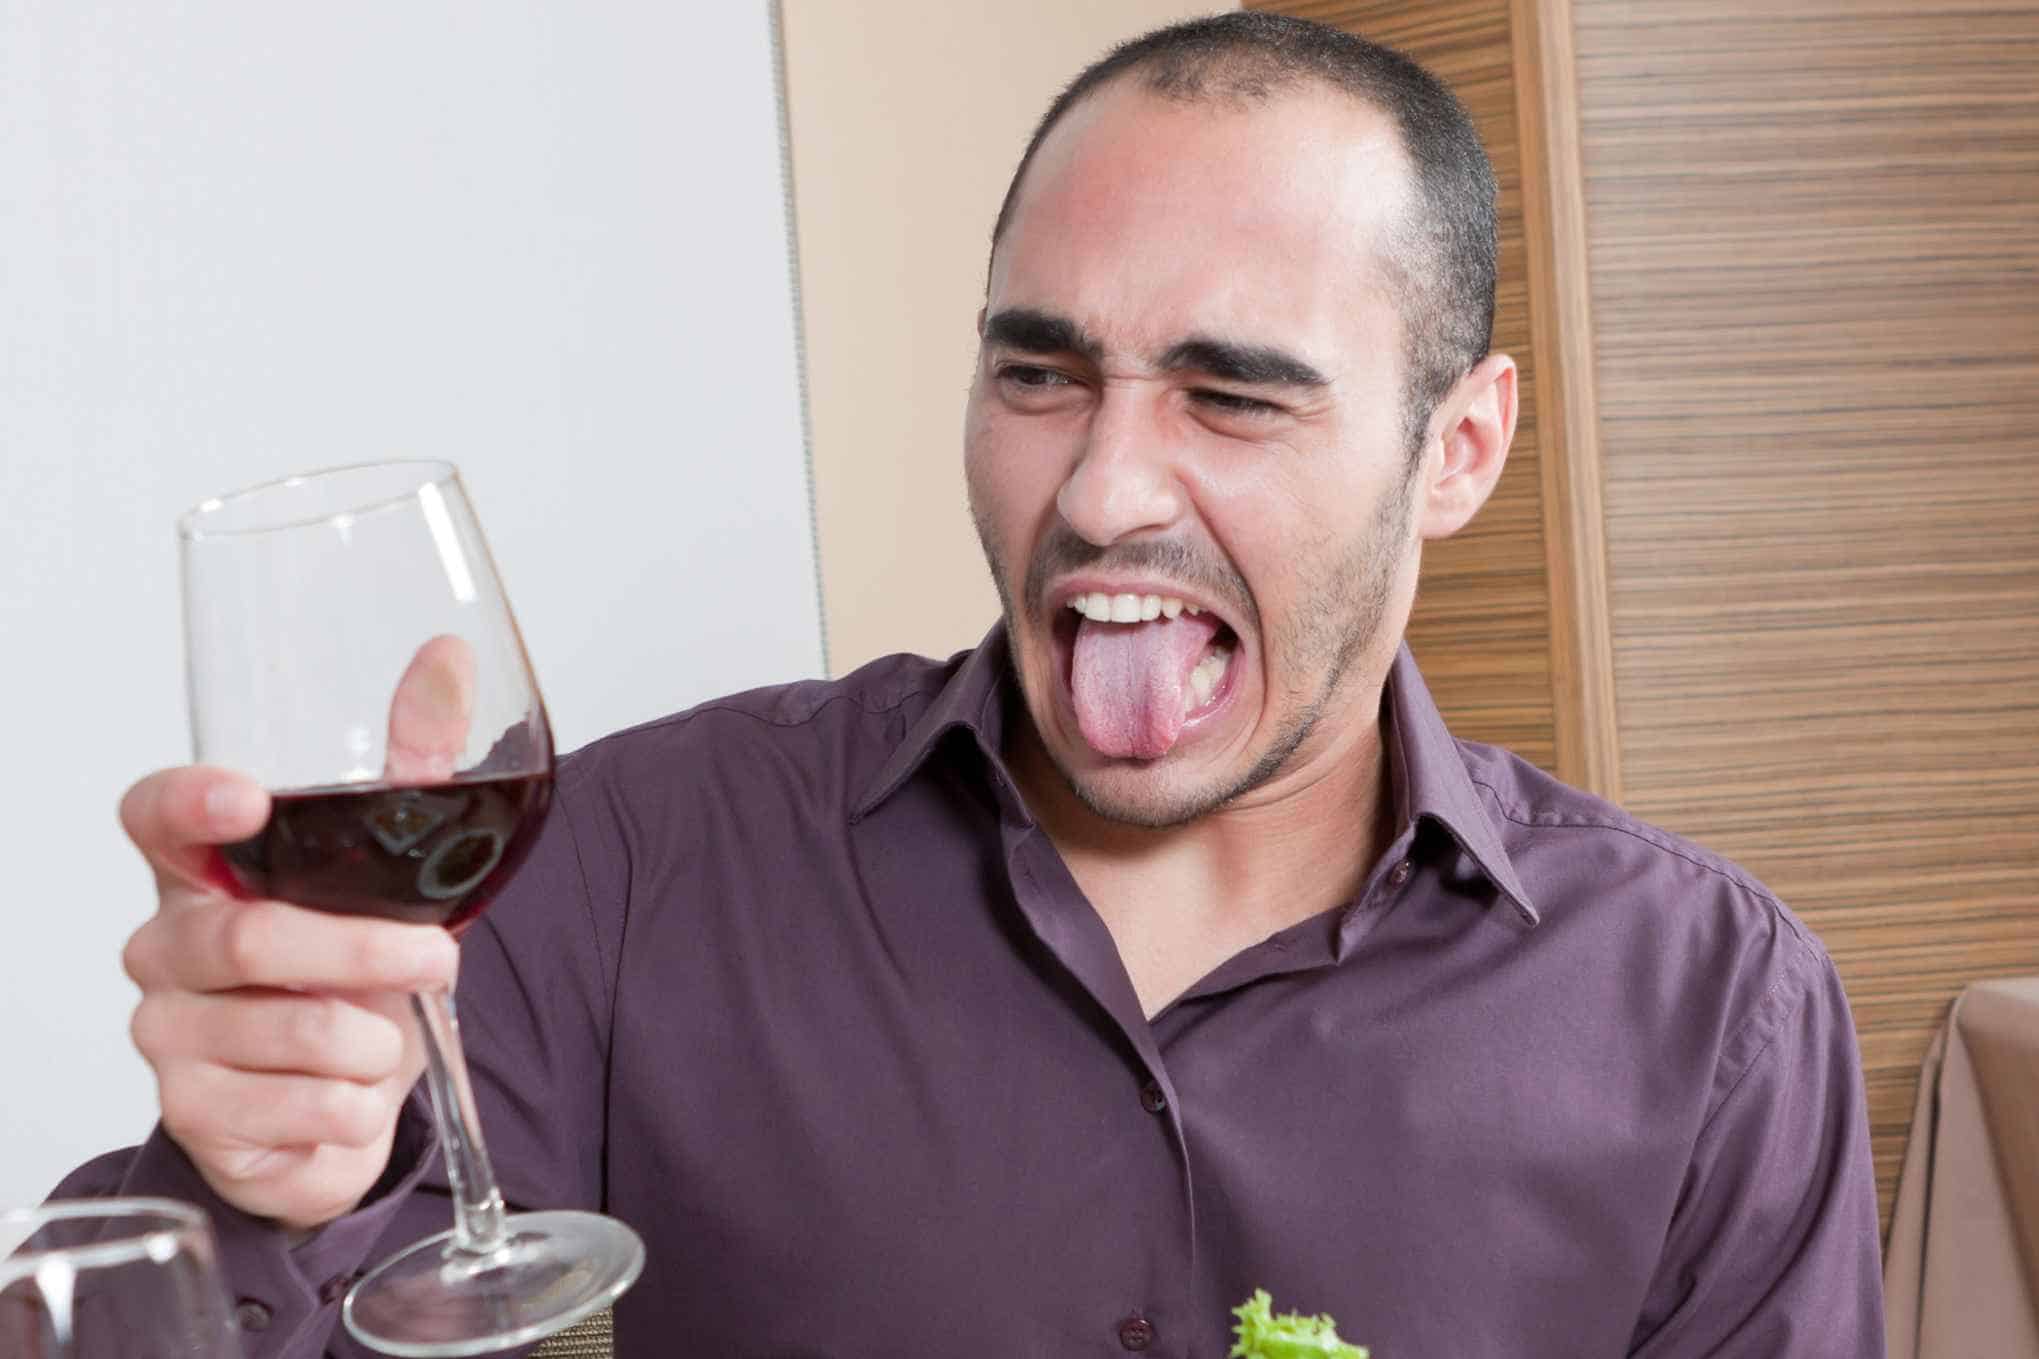 More About Telling If a Wine Is Bad